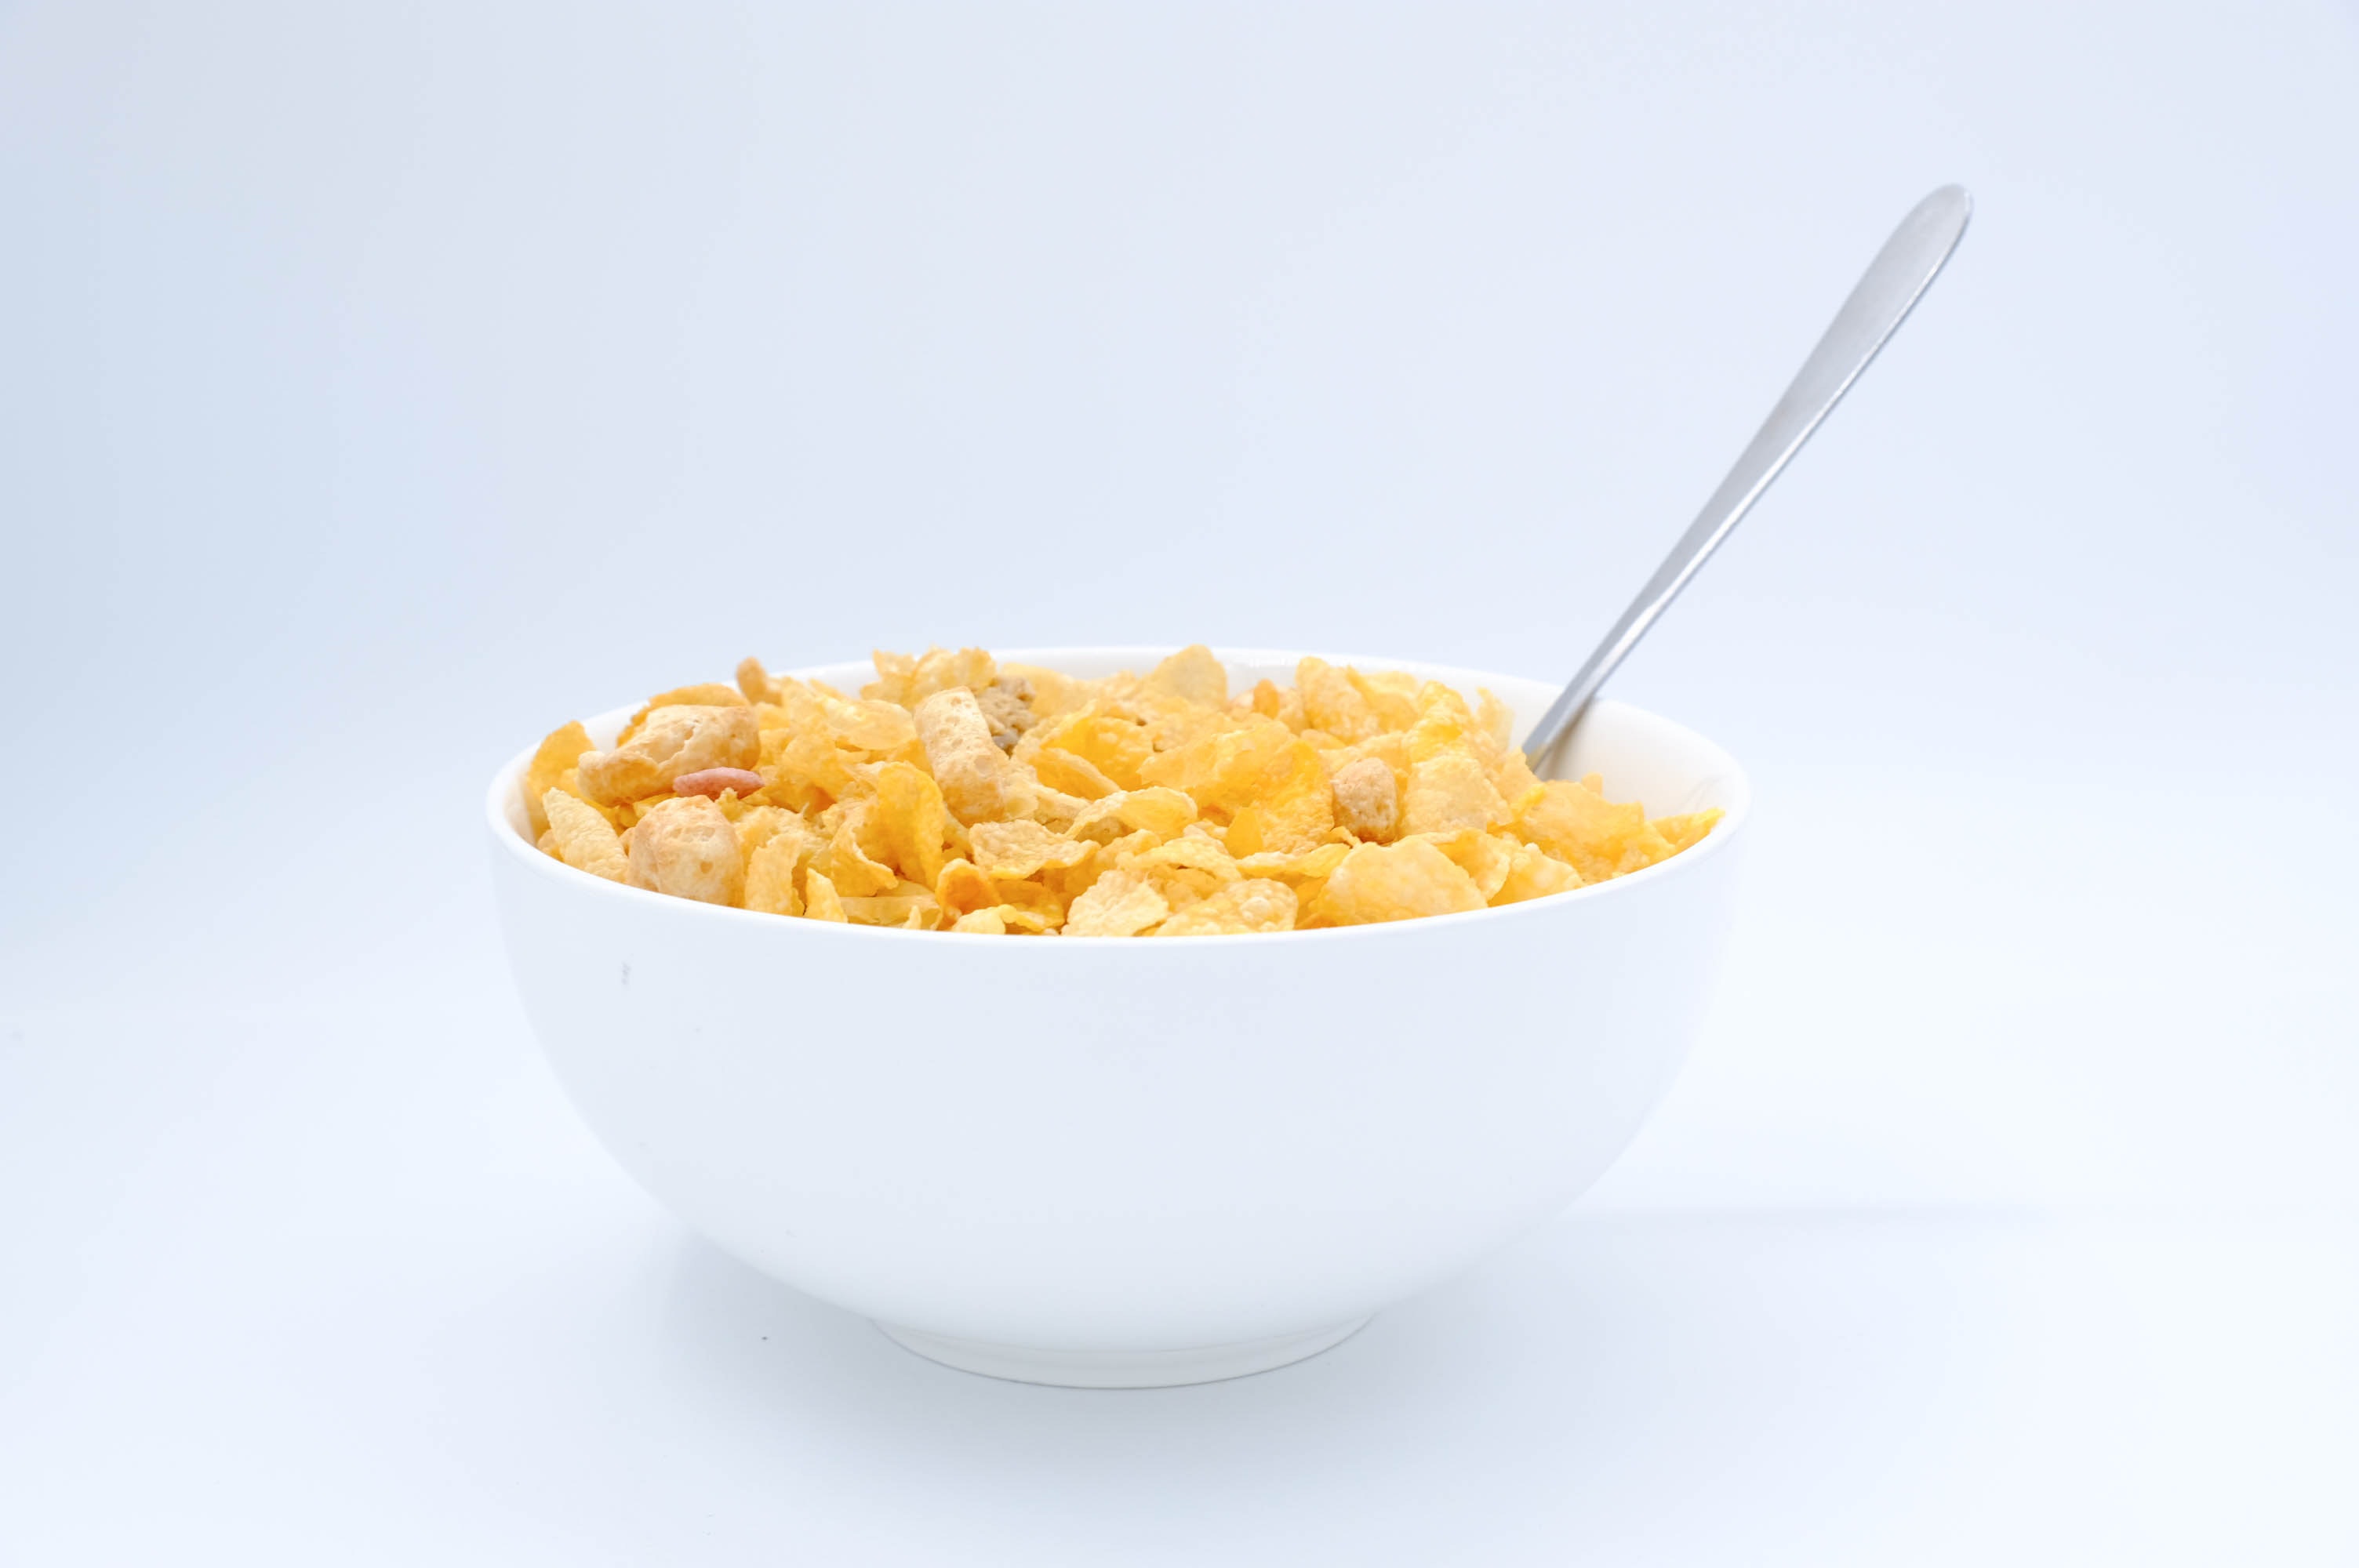 Bowl with cornflakes and spoon on white background · Free